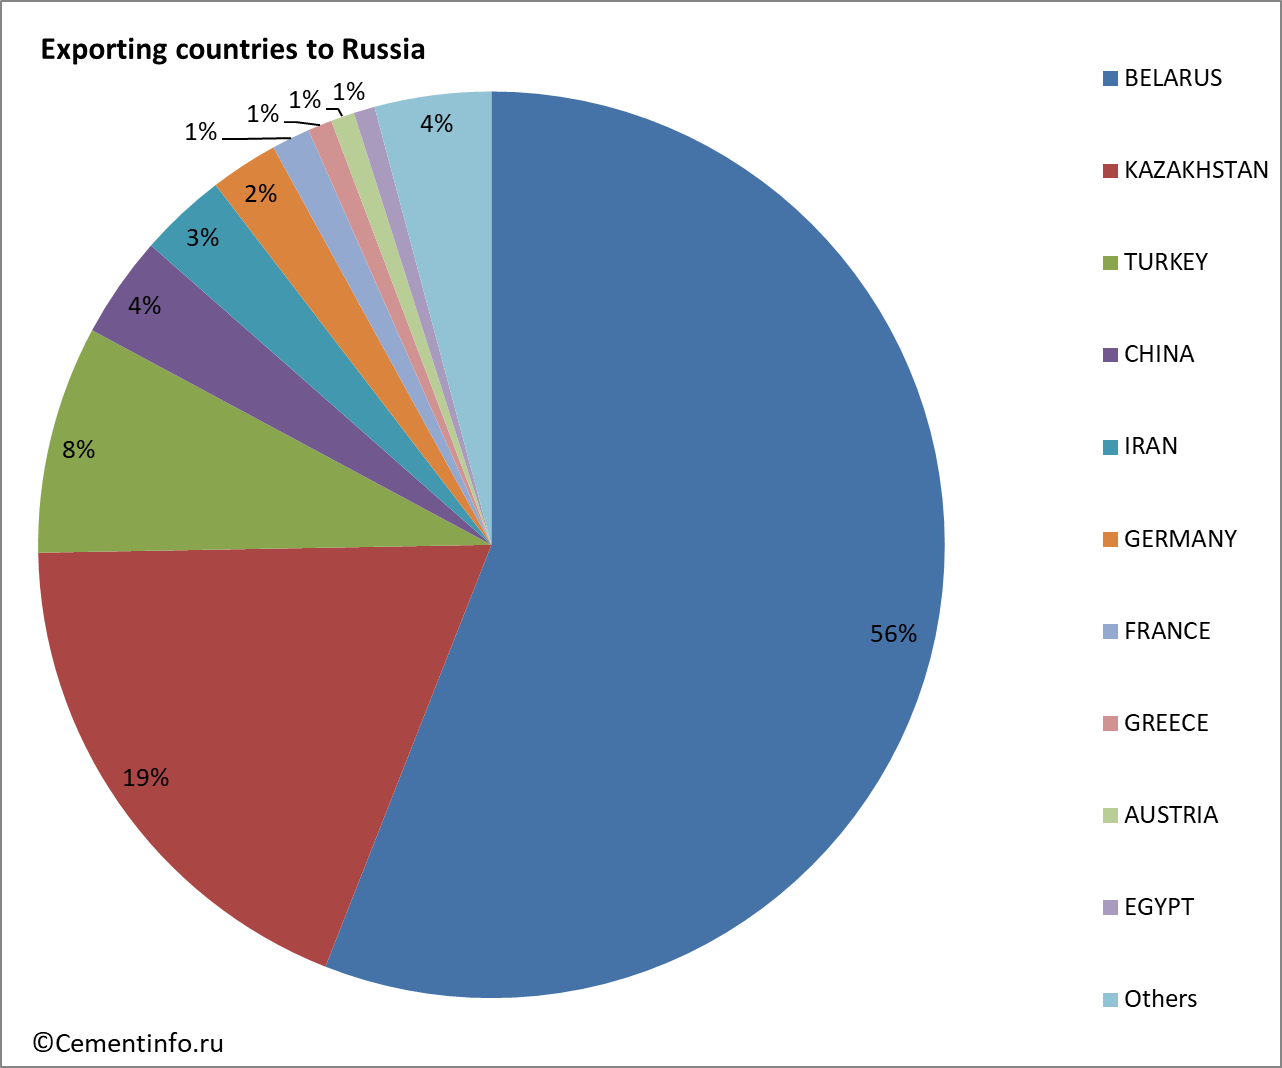 Exporting countries to Russia